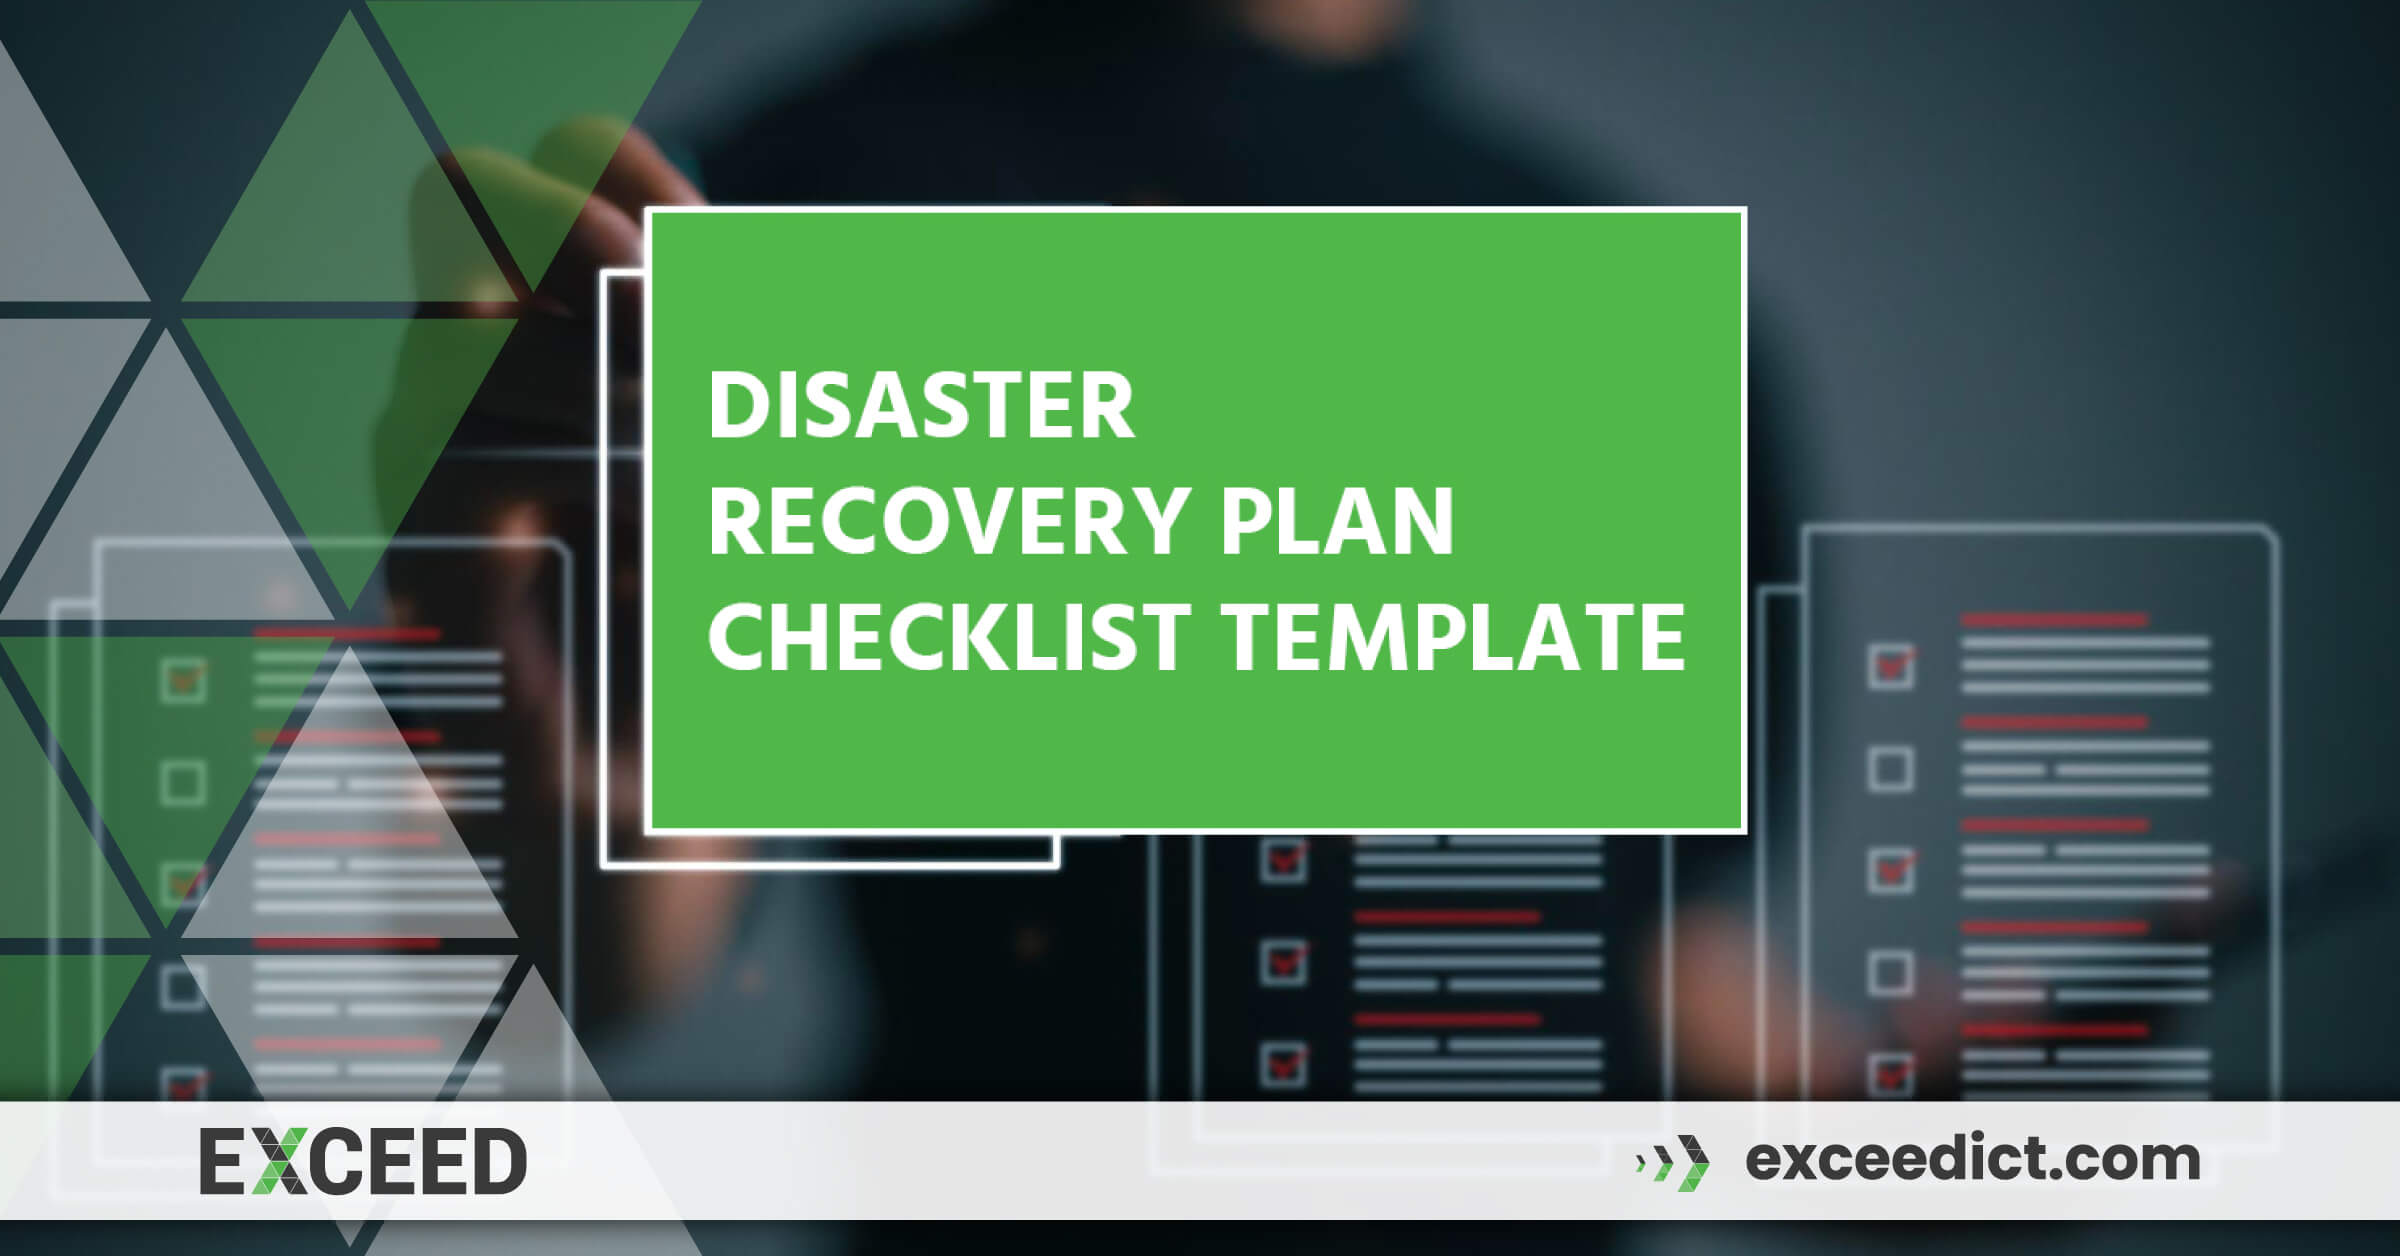 Disaster recovery plan checklist template for Small business